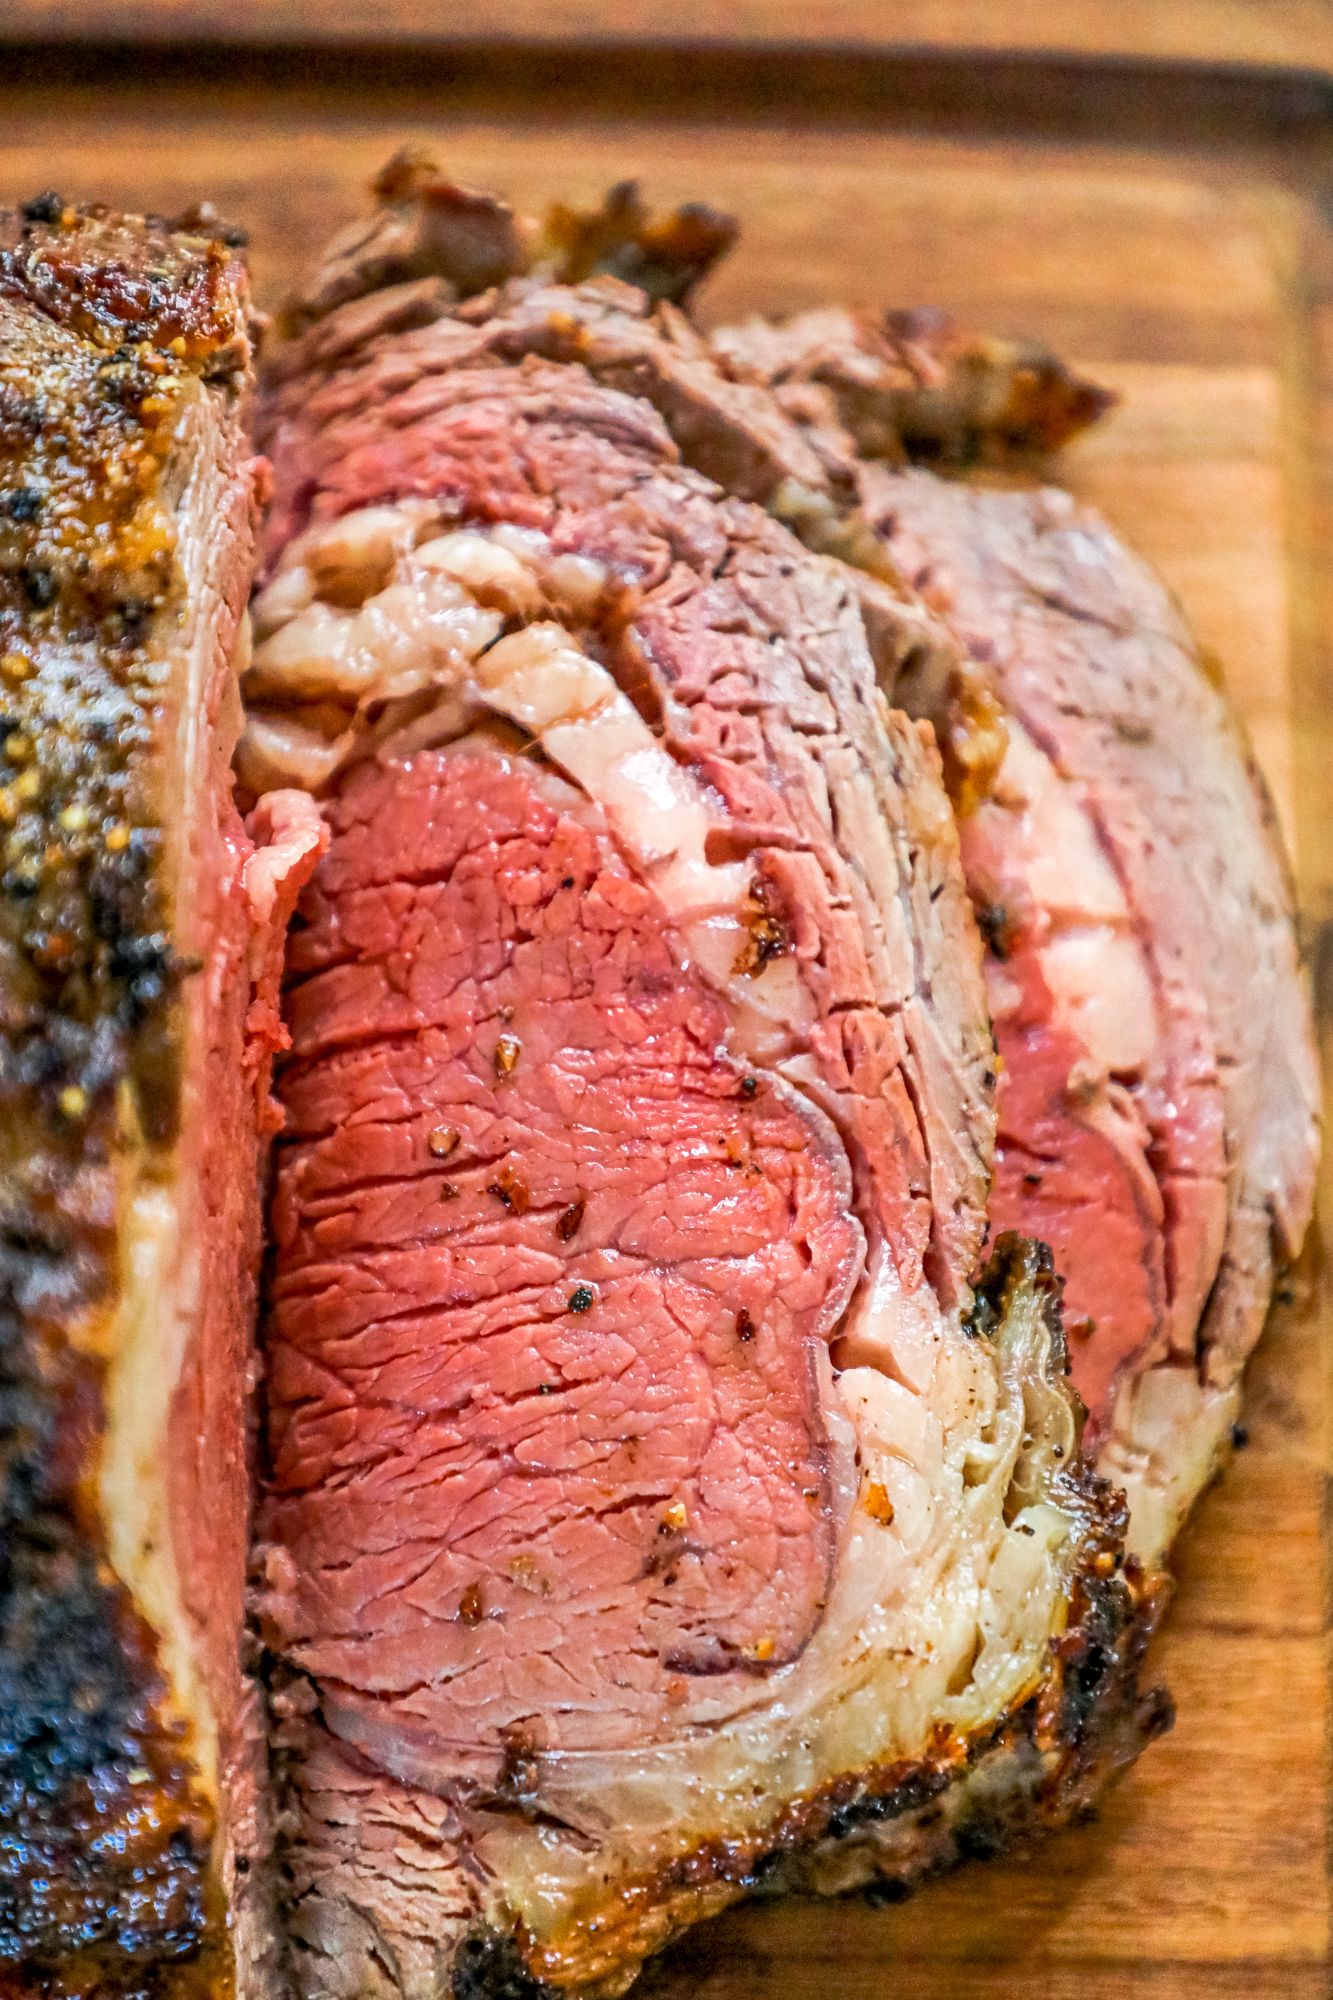 A flavorful ribeye roast sliced and displayed on a rustic wooden cutting board.